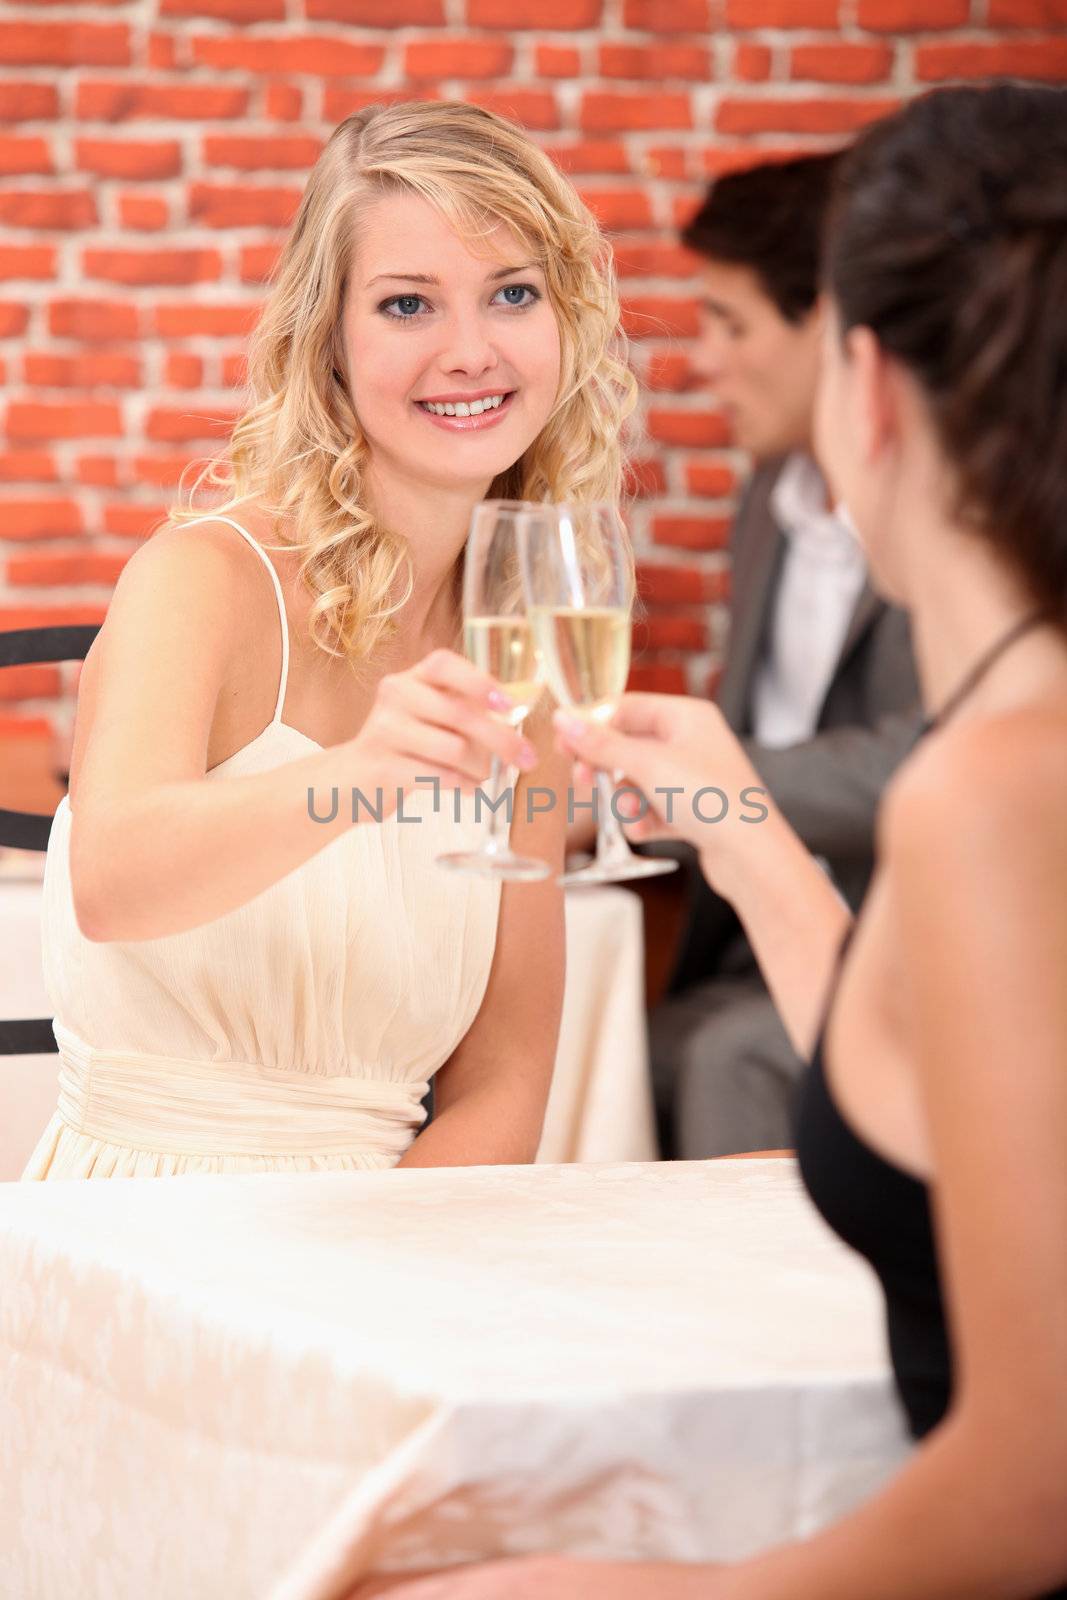 Girls drinking champagne in a restaurant by phovoir